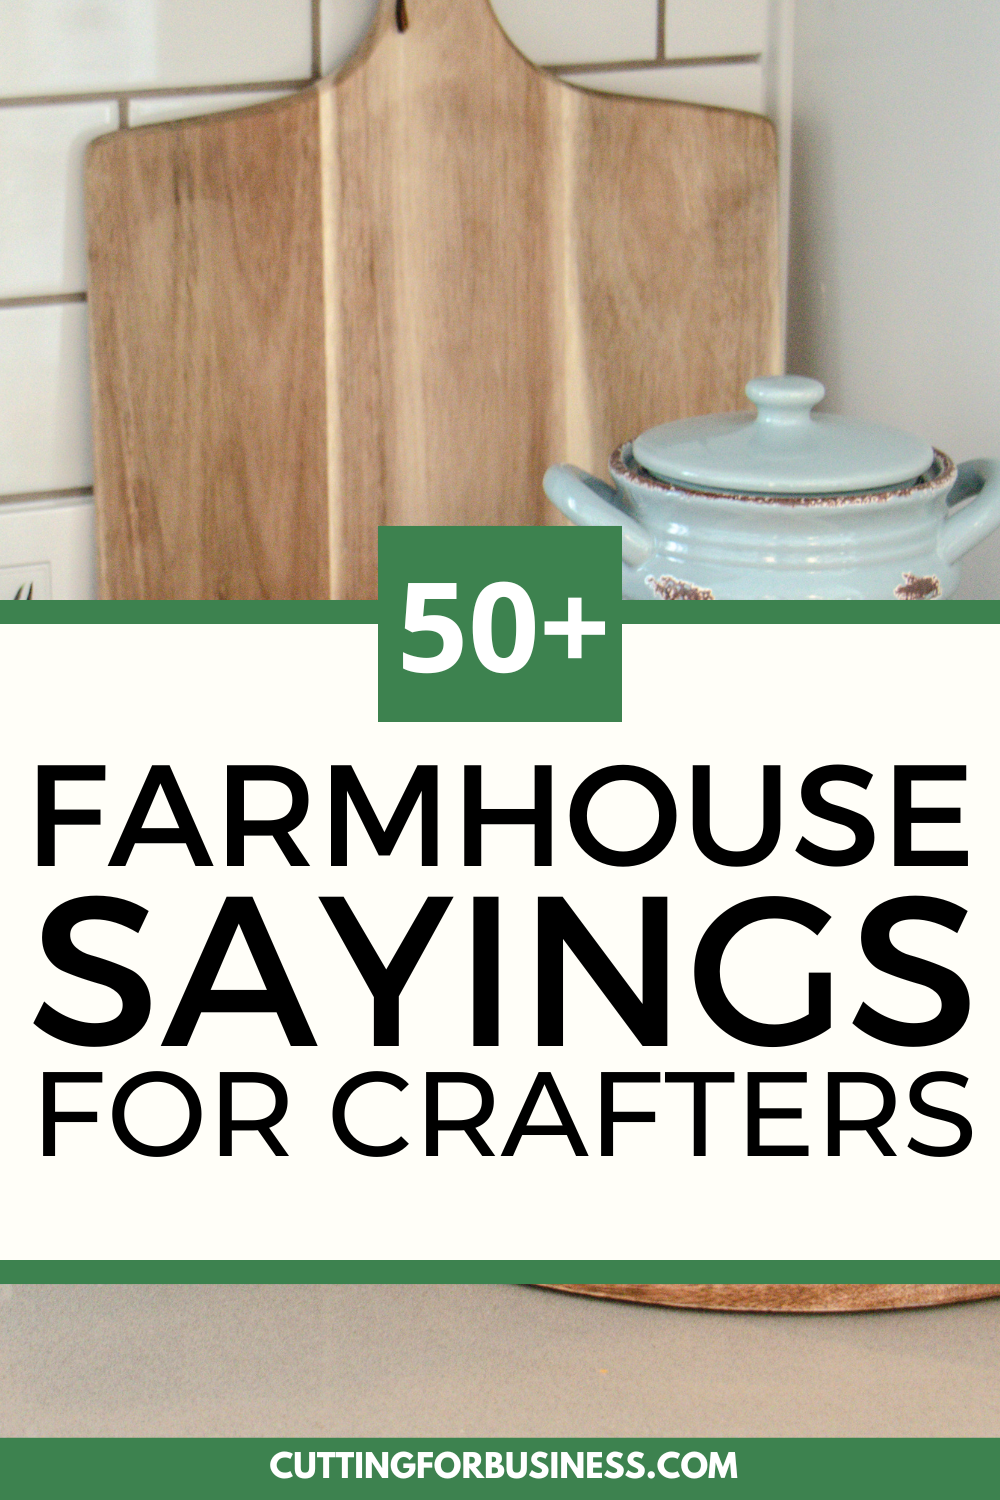 50+ Farmhouse Sayings for Crafters - cuttingforbusiness.com